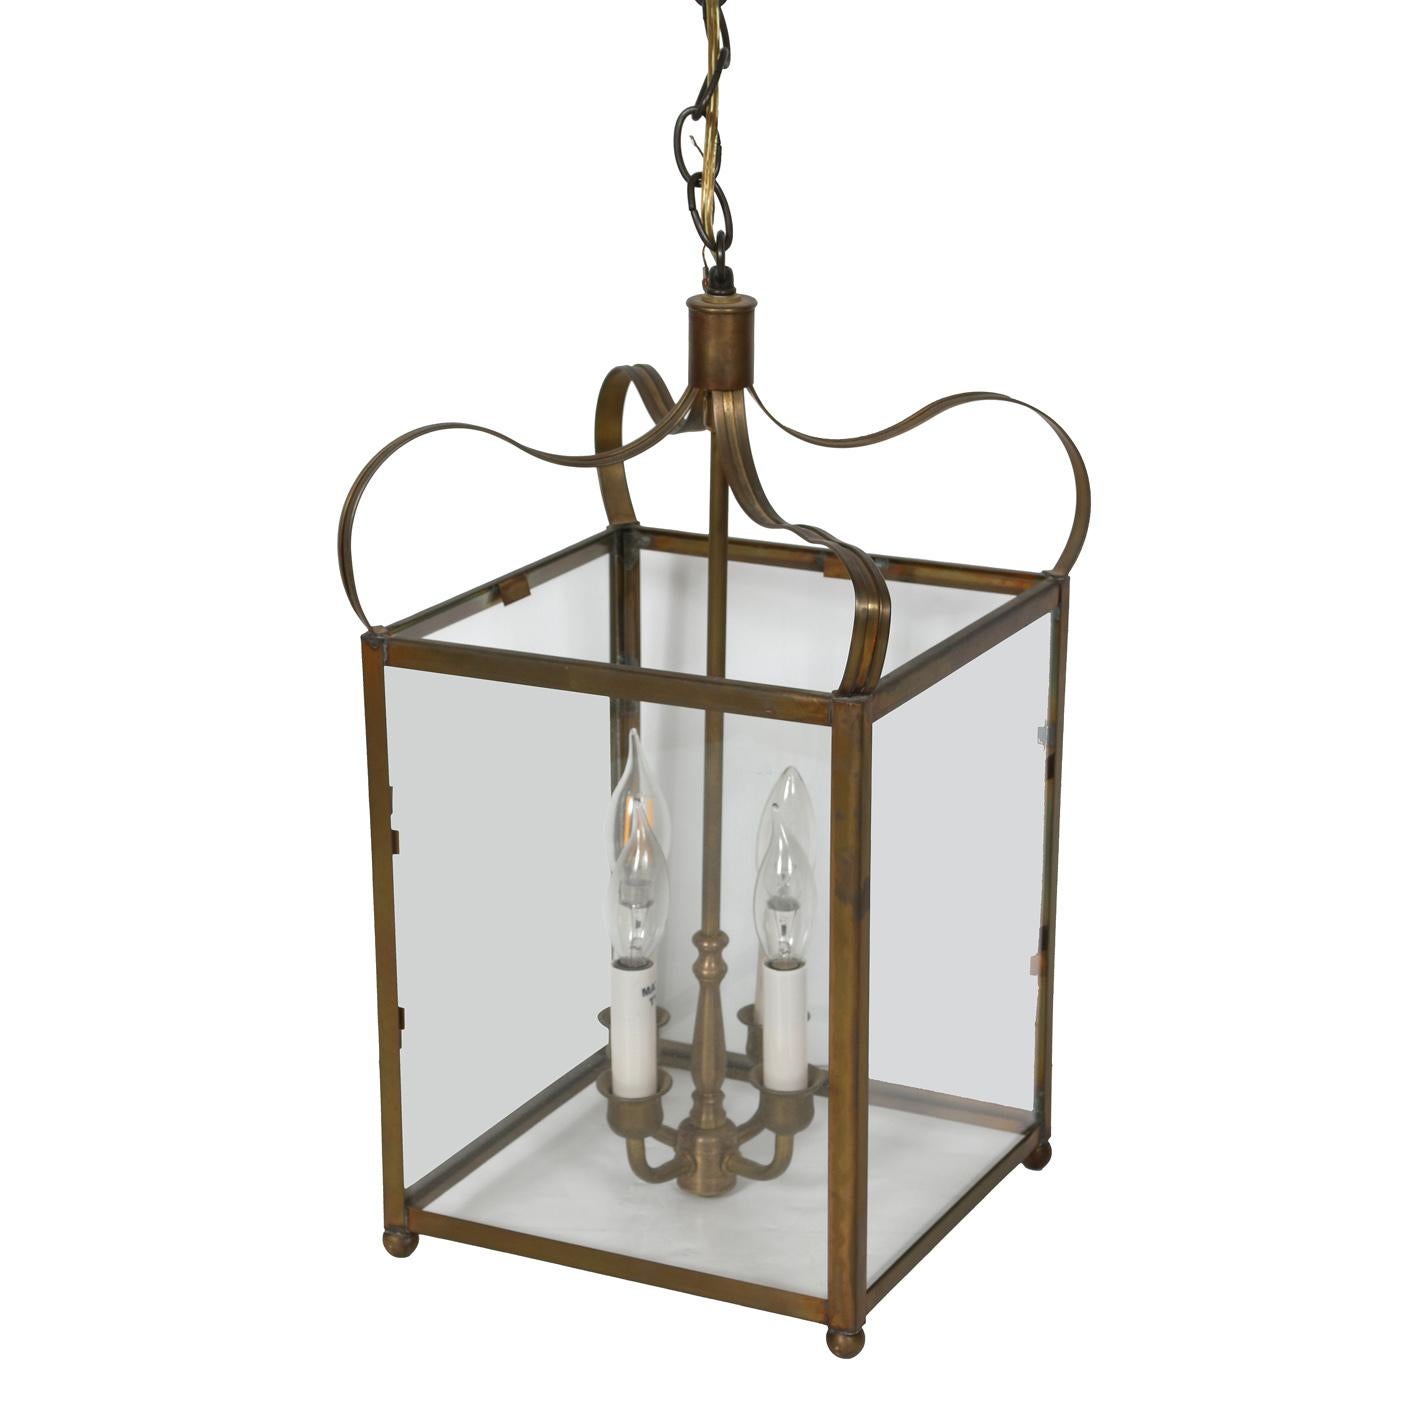 A pair of vintage brass square lanterns with four lights and shaped top, circa 1930.